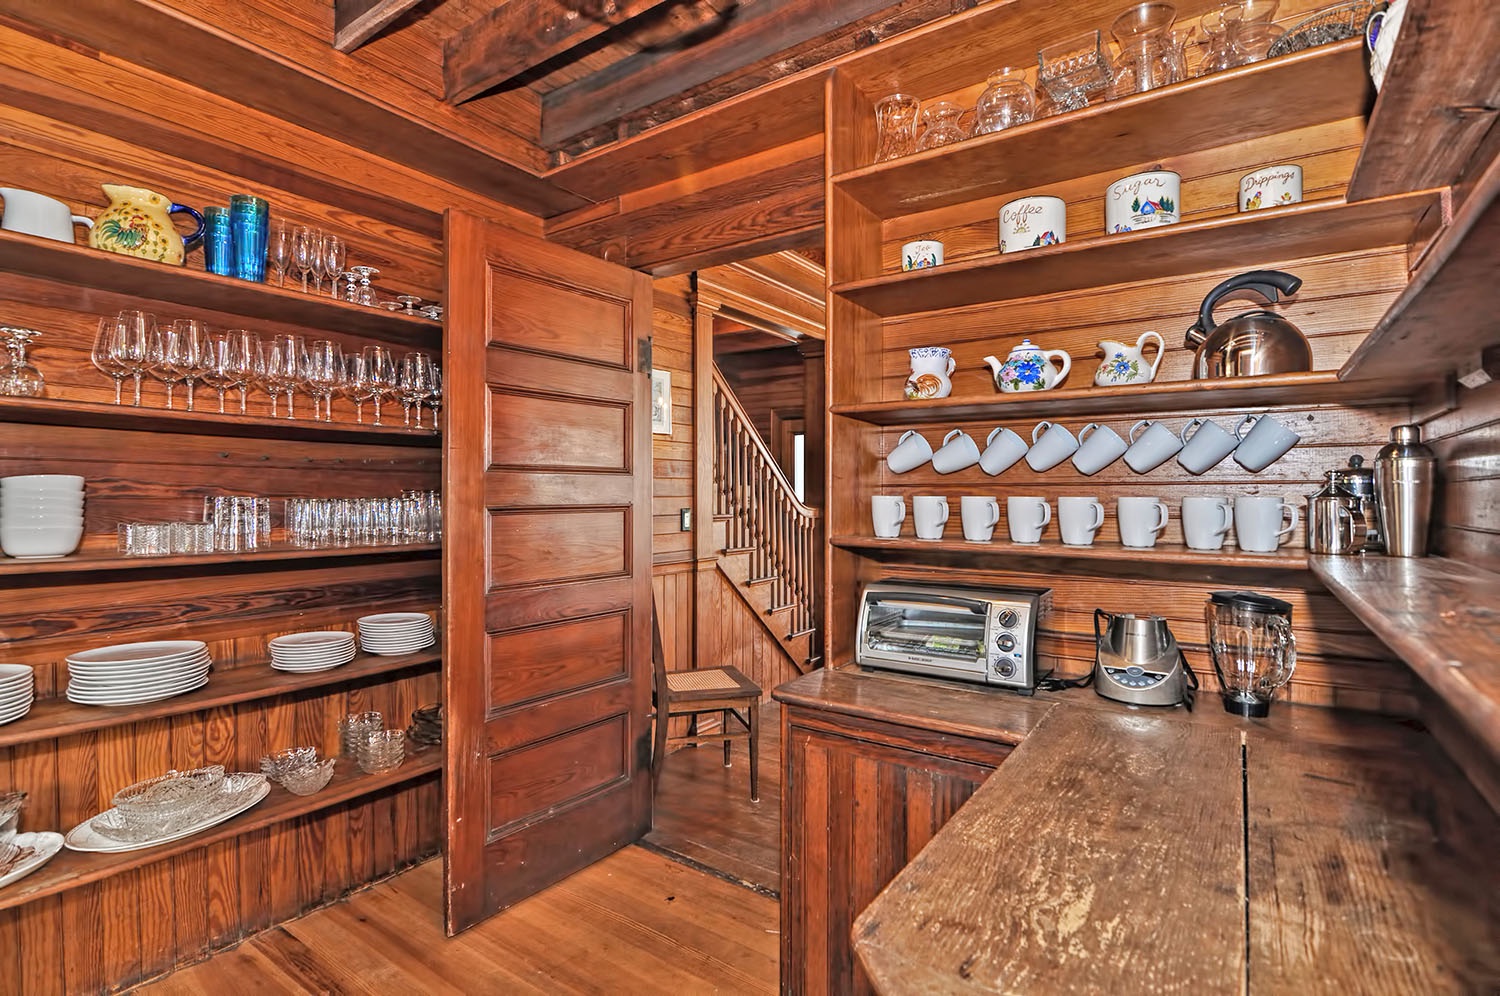 The pantry is well stocked with dishes, glassware, and more!